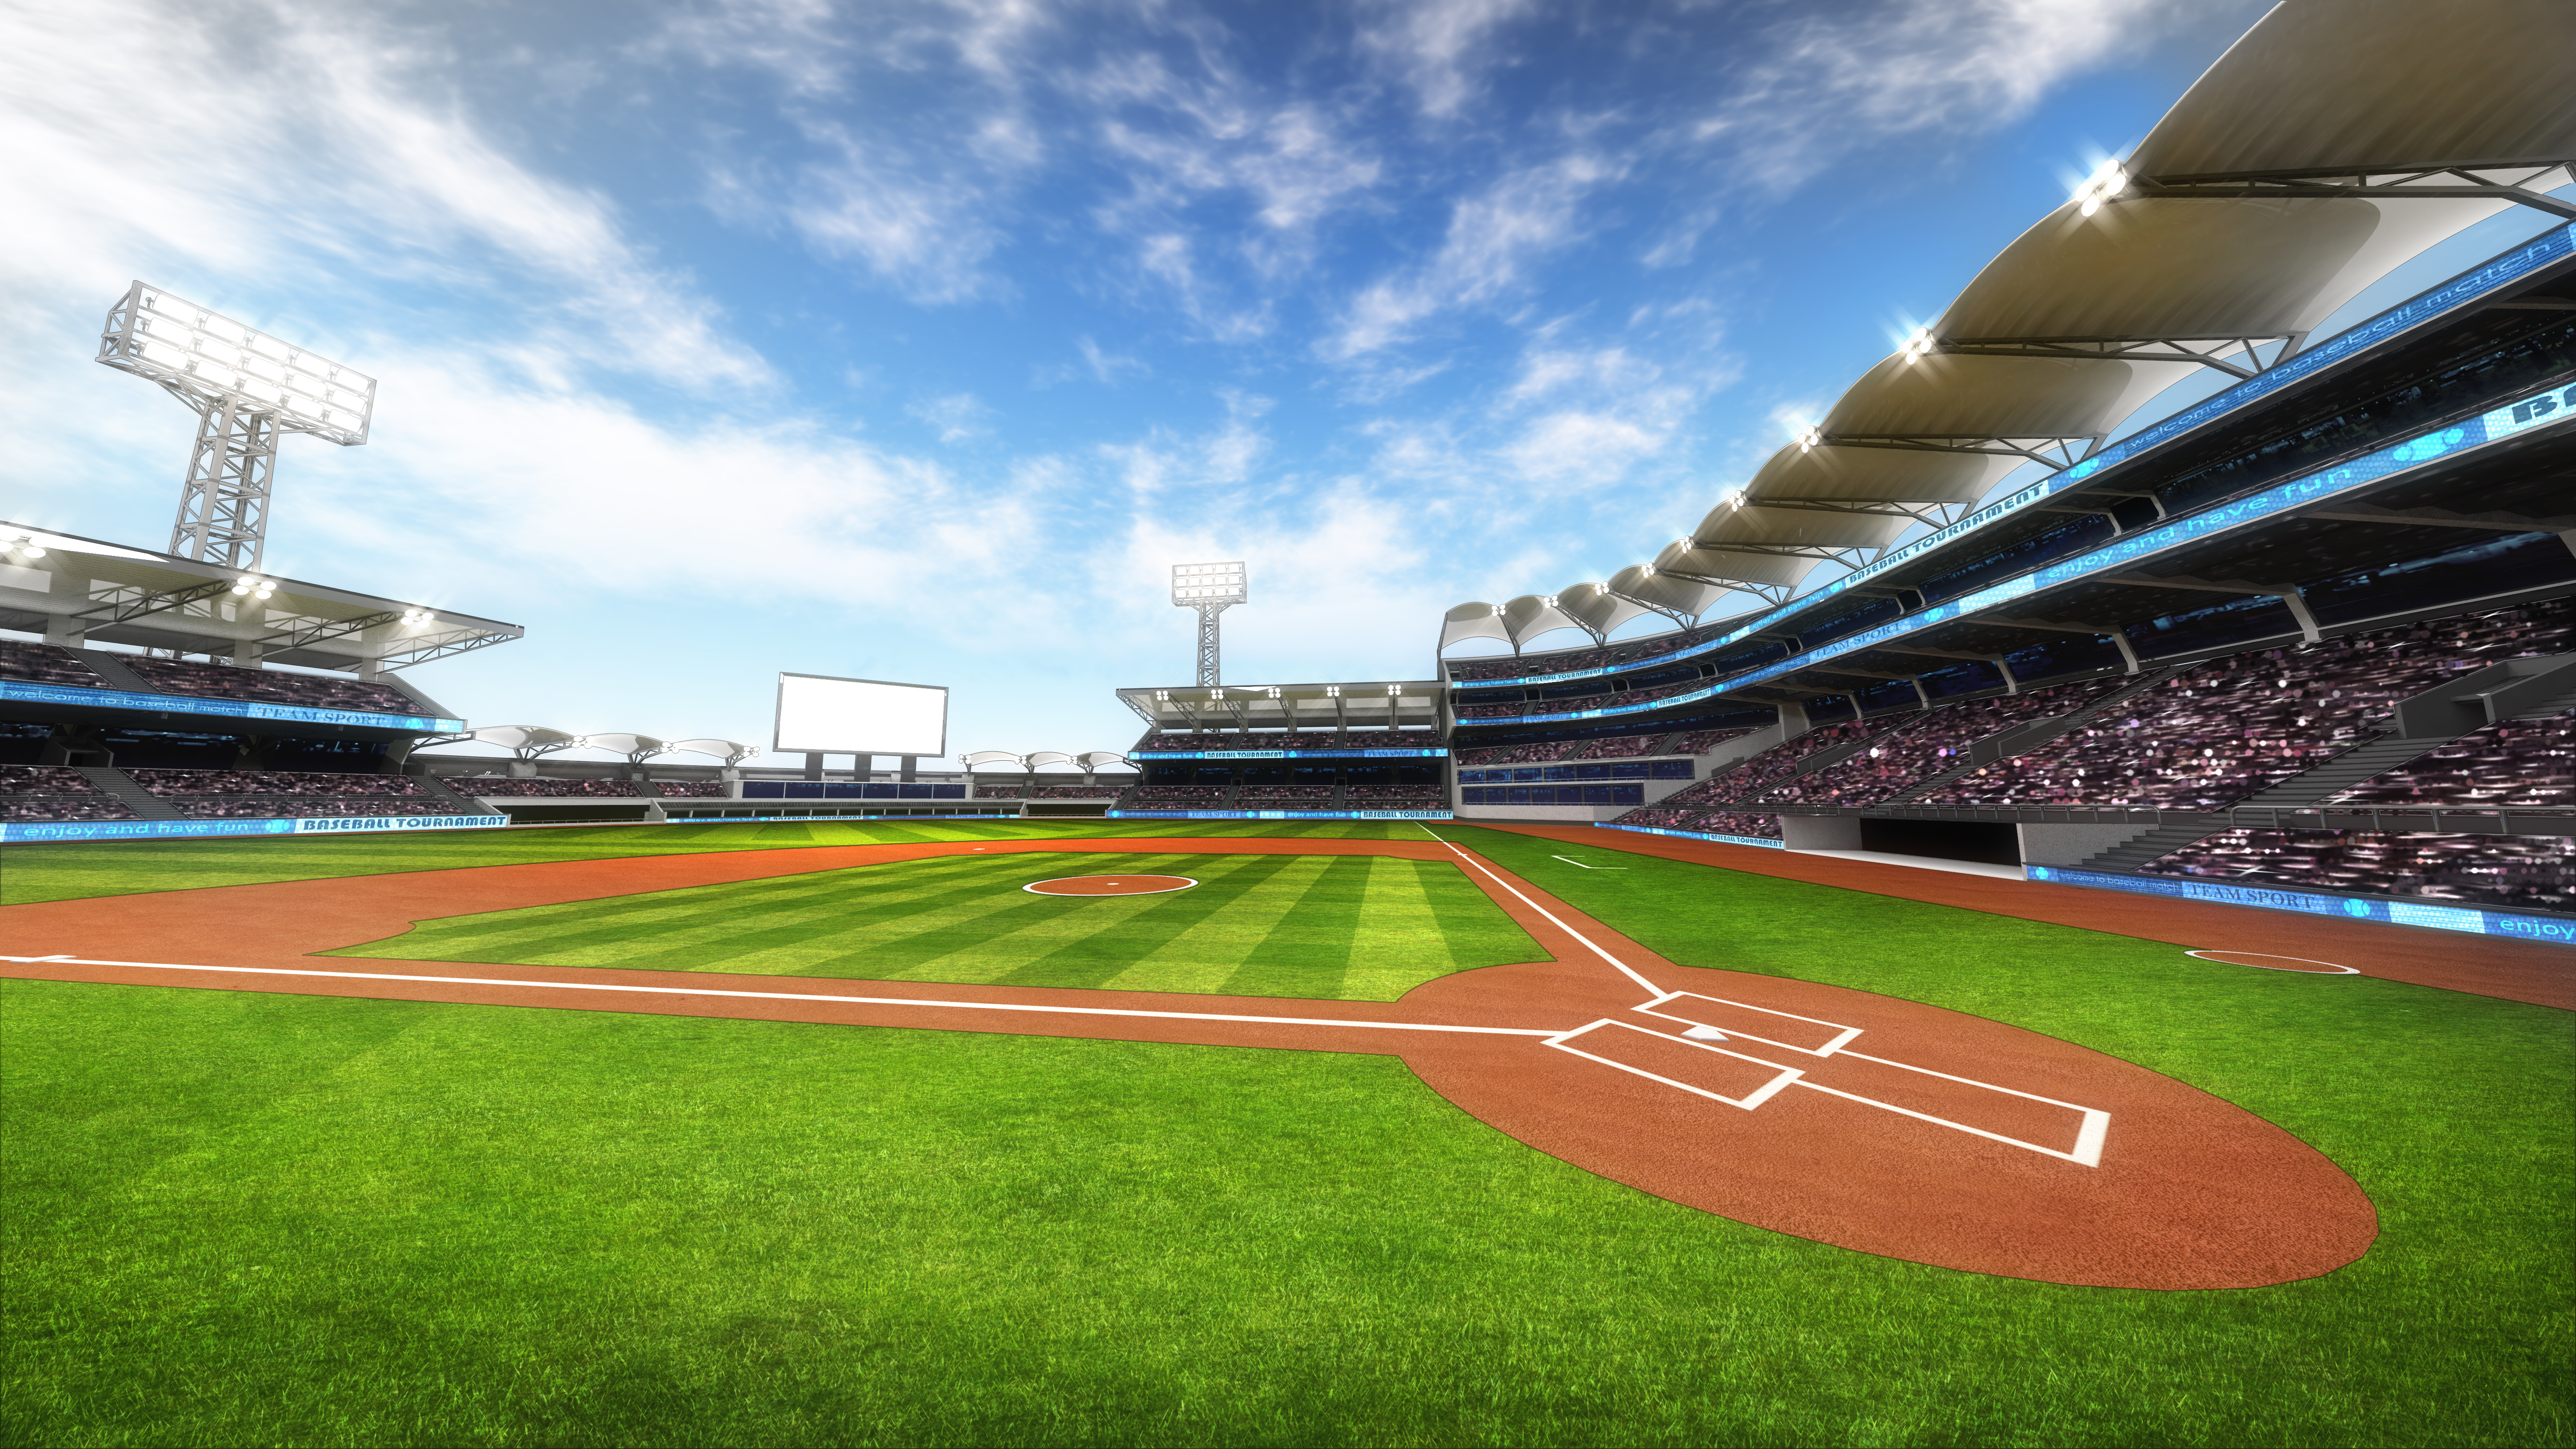 Baseball stadium with fans at sunny weather